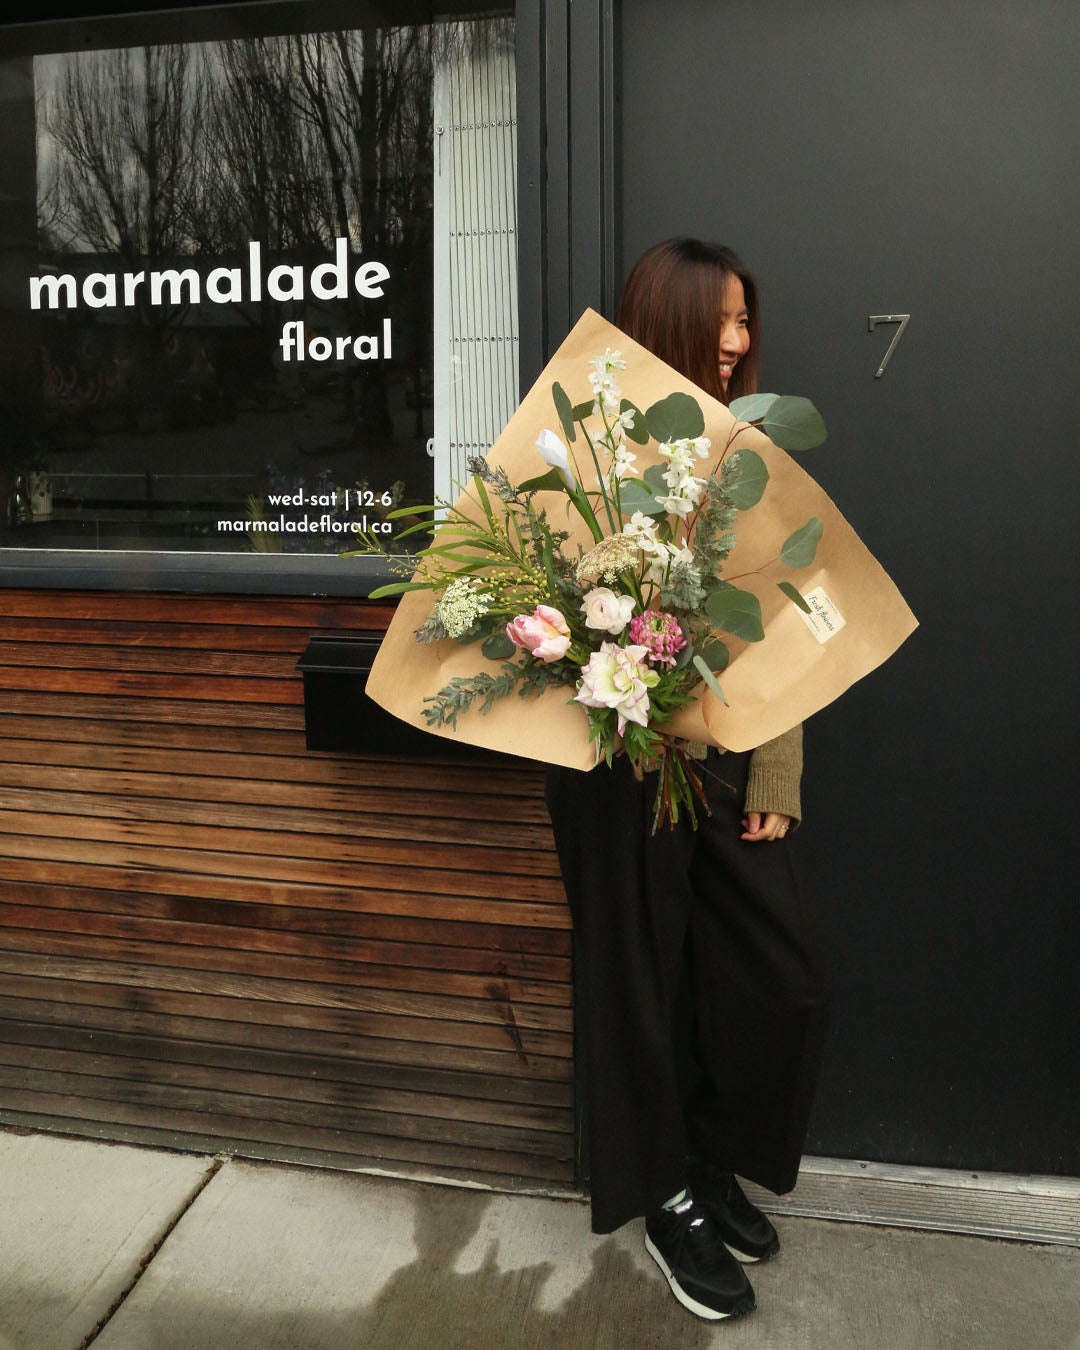 Share The Love - Marmalade Floral